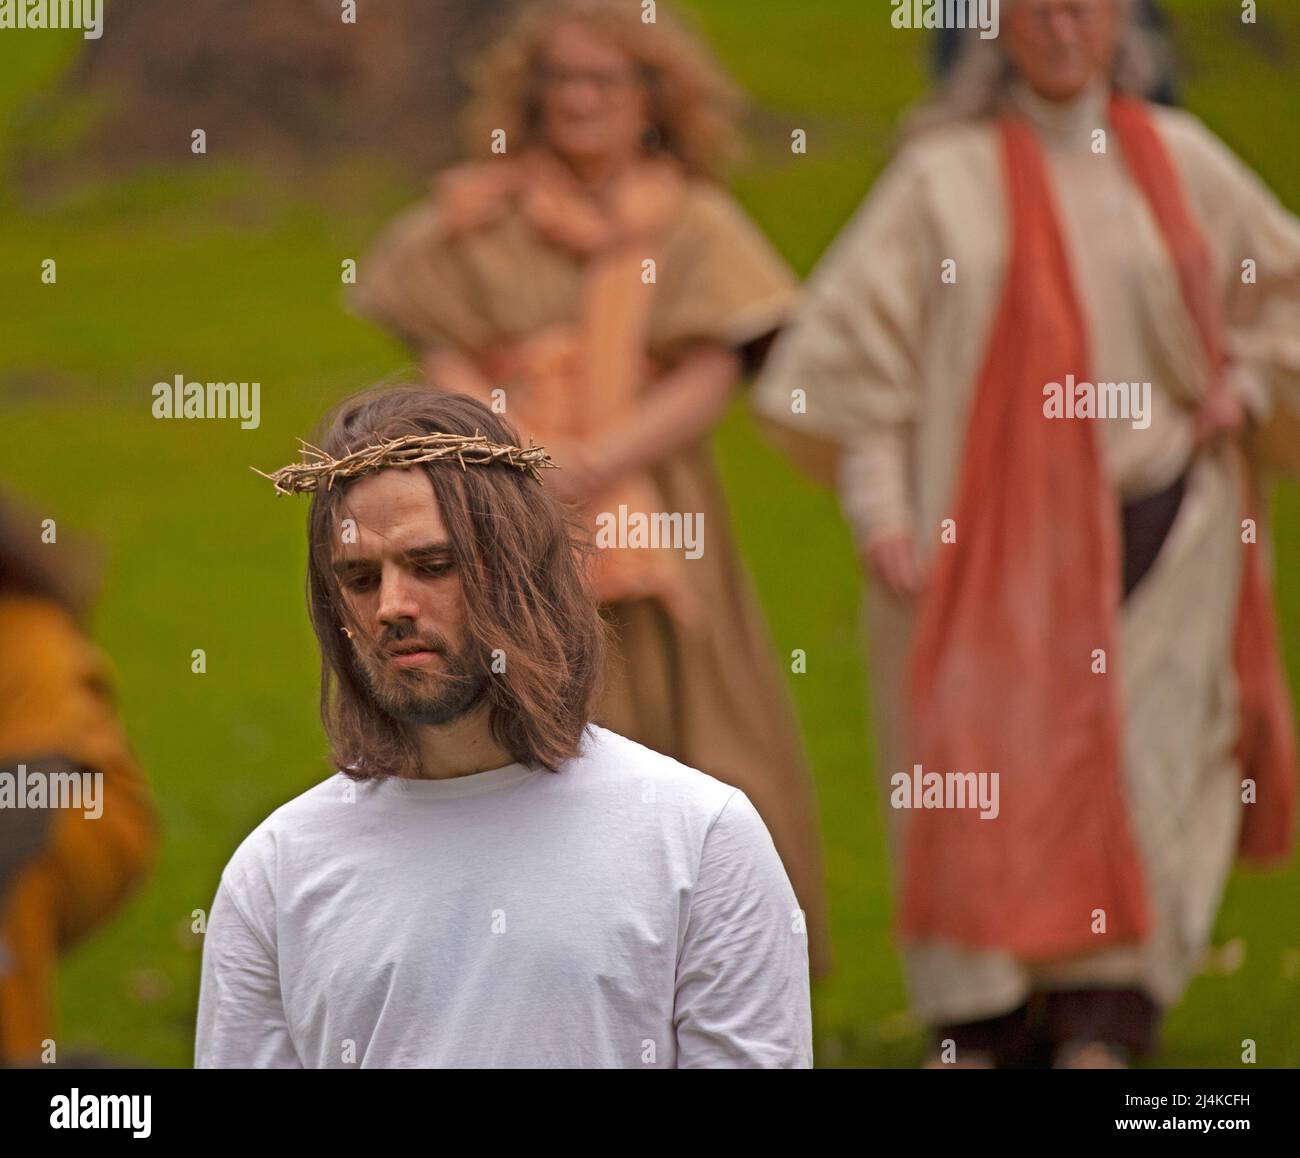 Princes Street Gardens West, 16th April 2022. The Edinburgh Easter Play, 'Hope Rises' directed by Suzanne Lofthus and organised by the Princes Street Easter Play Trust. Hundreds watched the stirring emotional performance which was created by a team of community performers drawn from all walks of life. Jesus played by Luke Rowe. Credit: Scottishcreative/alamy live News. Stock Photo